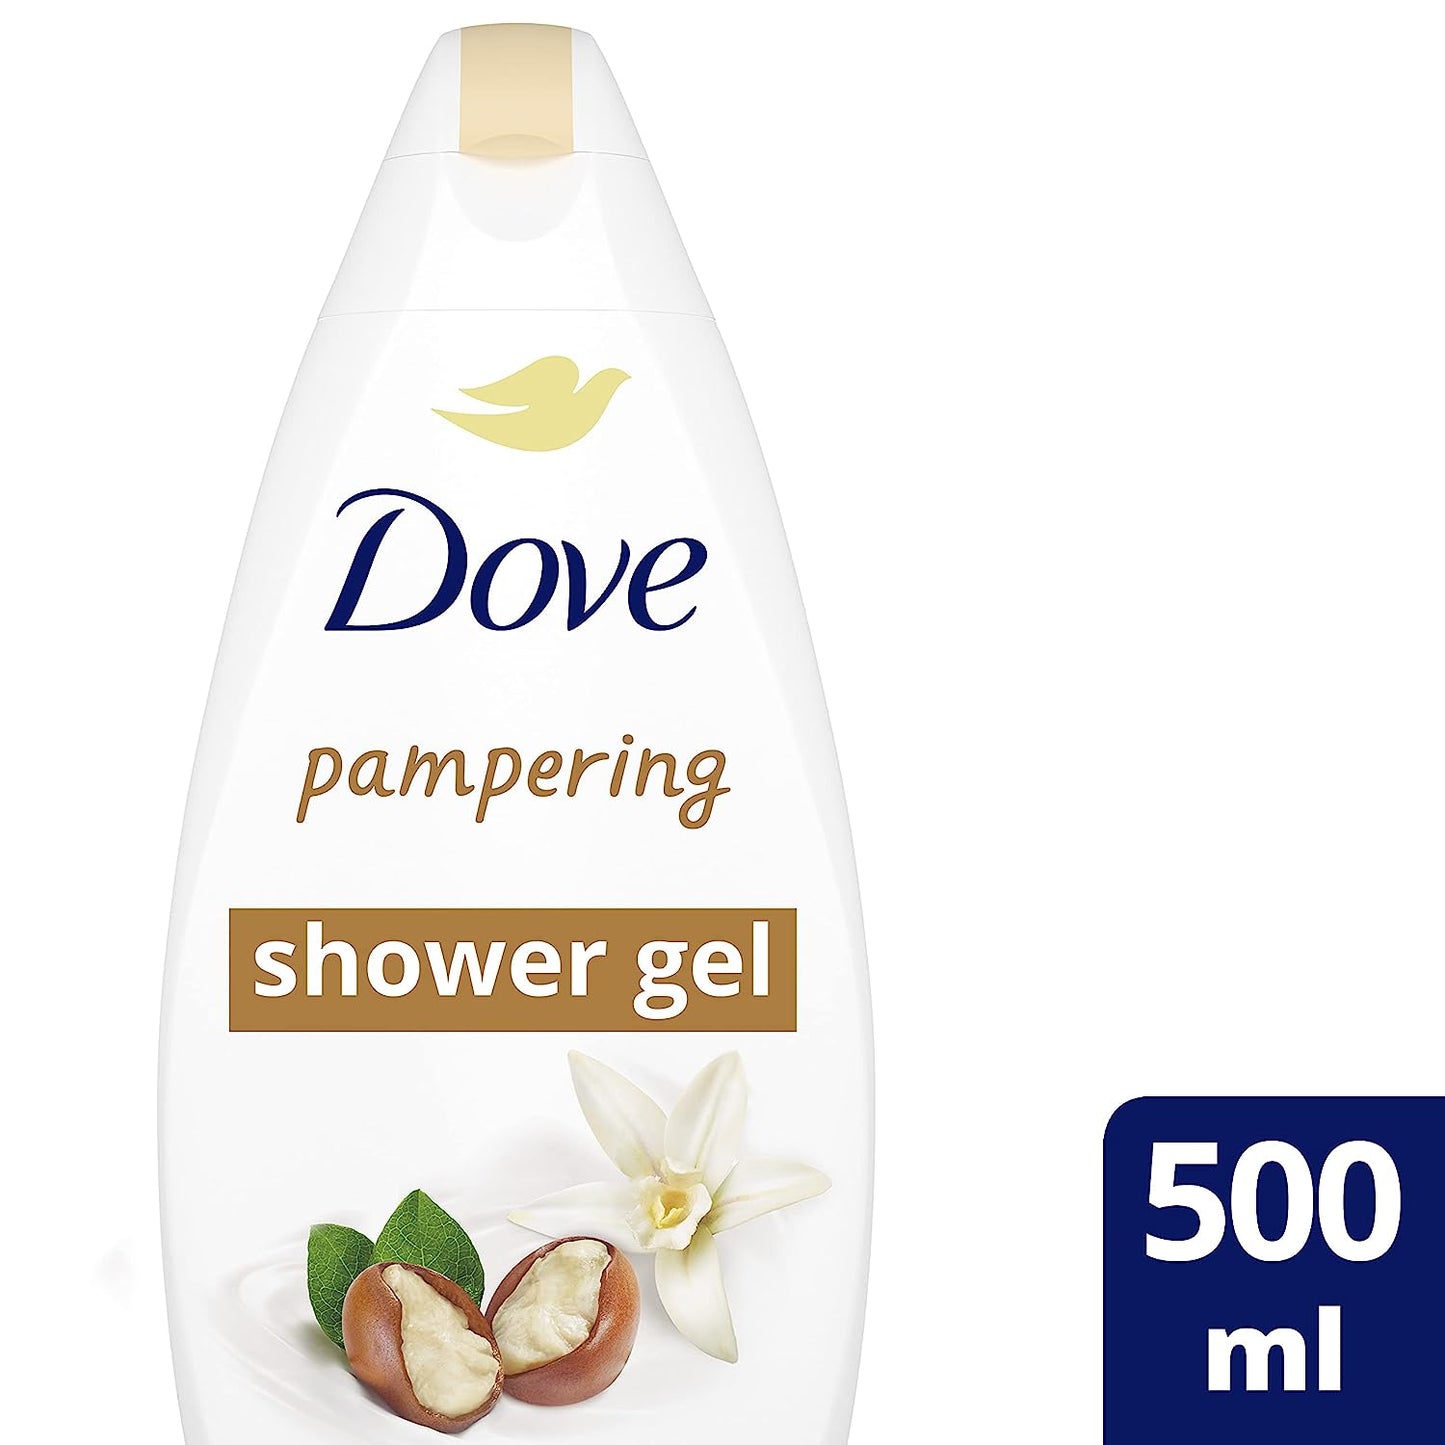 Dove Shower gel Shea Butter and Vanilla Body Wash 500 ml 16.9 oz "2-PACK"